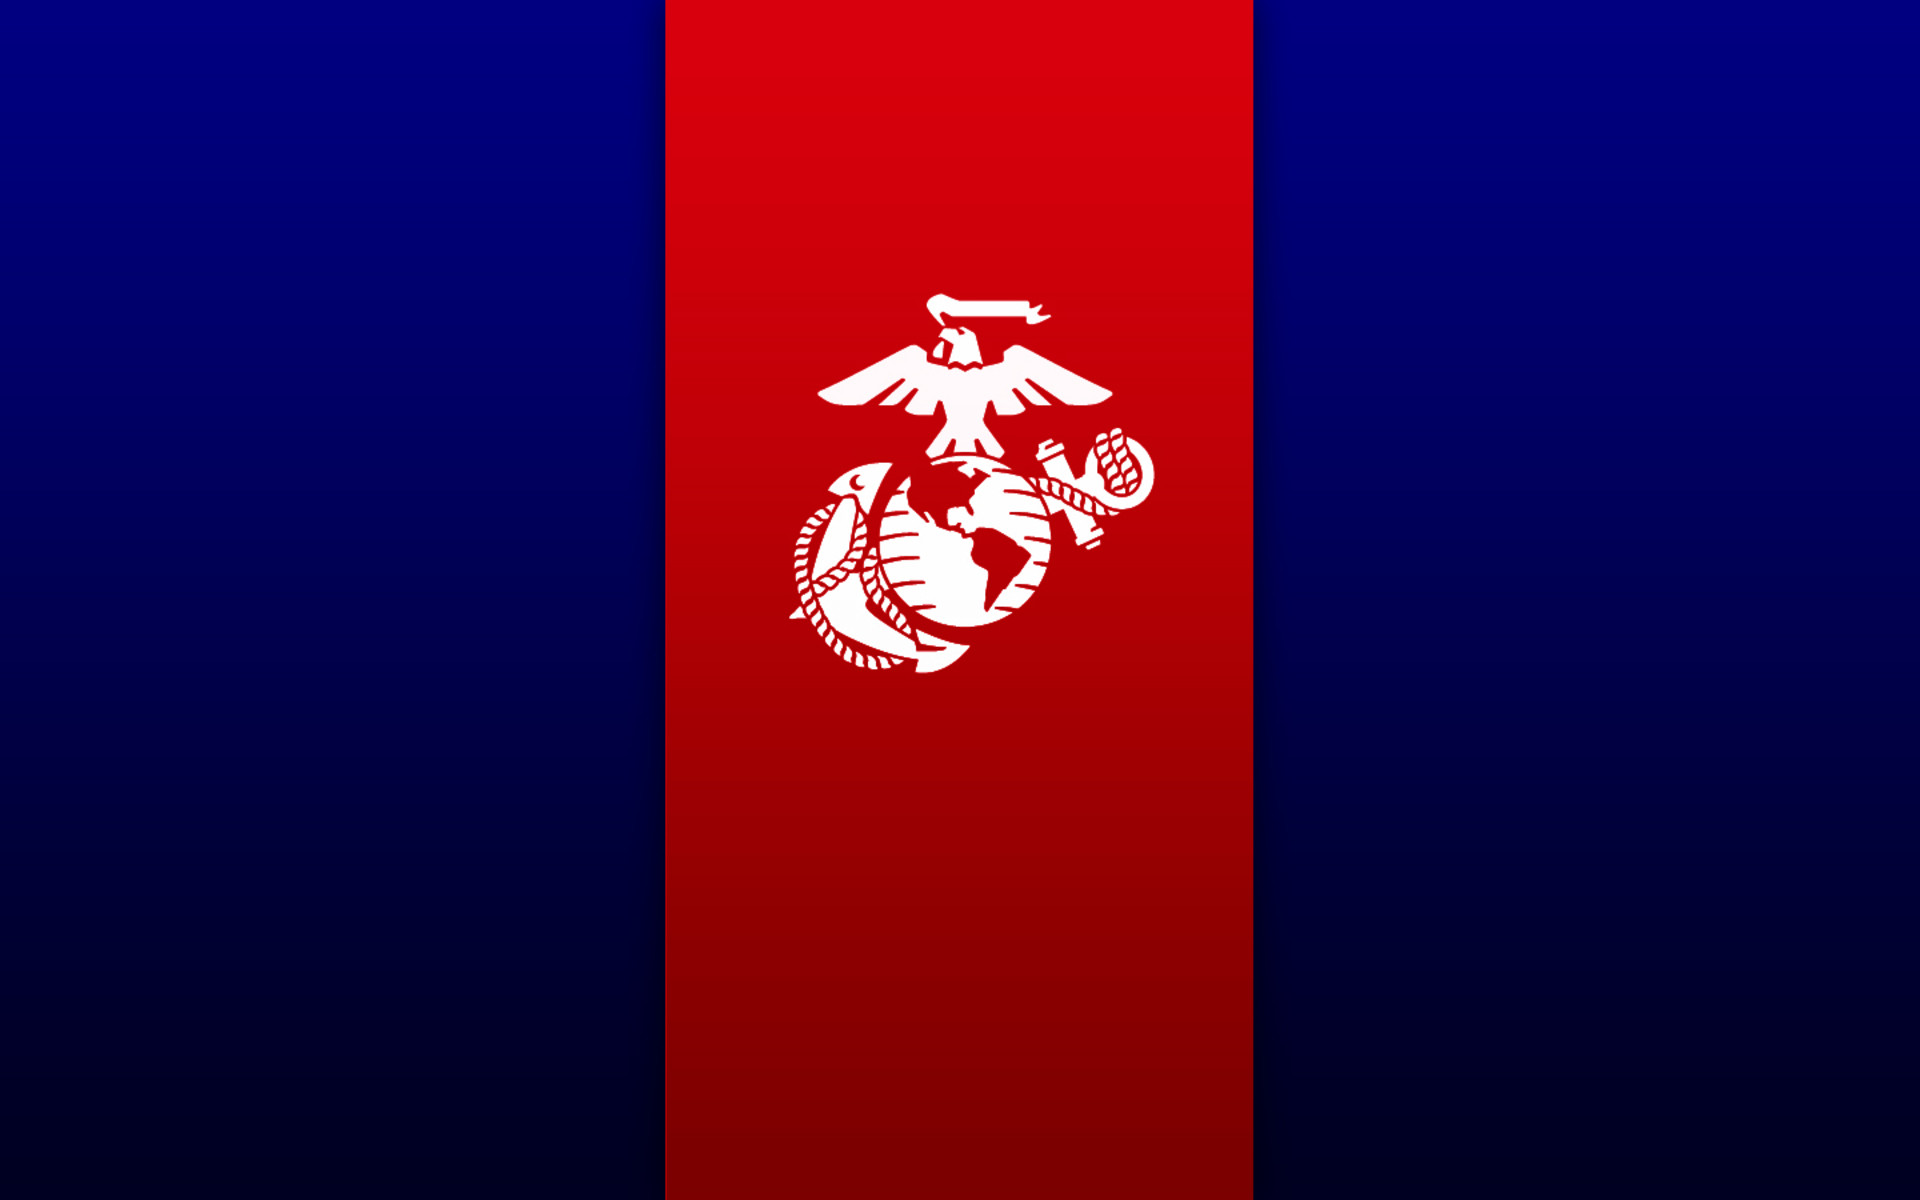 1920x1200 1920x1440 Px HD Desktop Wallpaper : Wallpapers Usmc Red And Blue Background